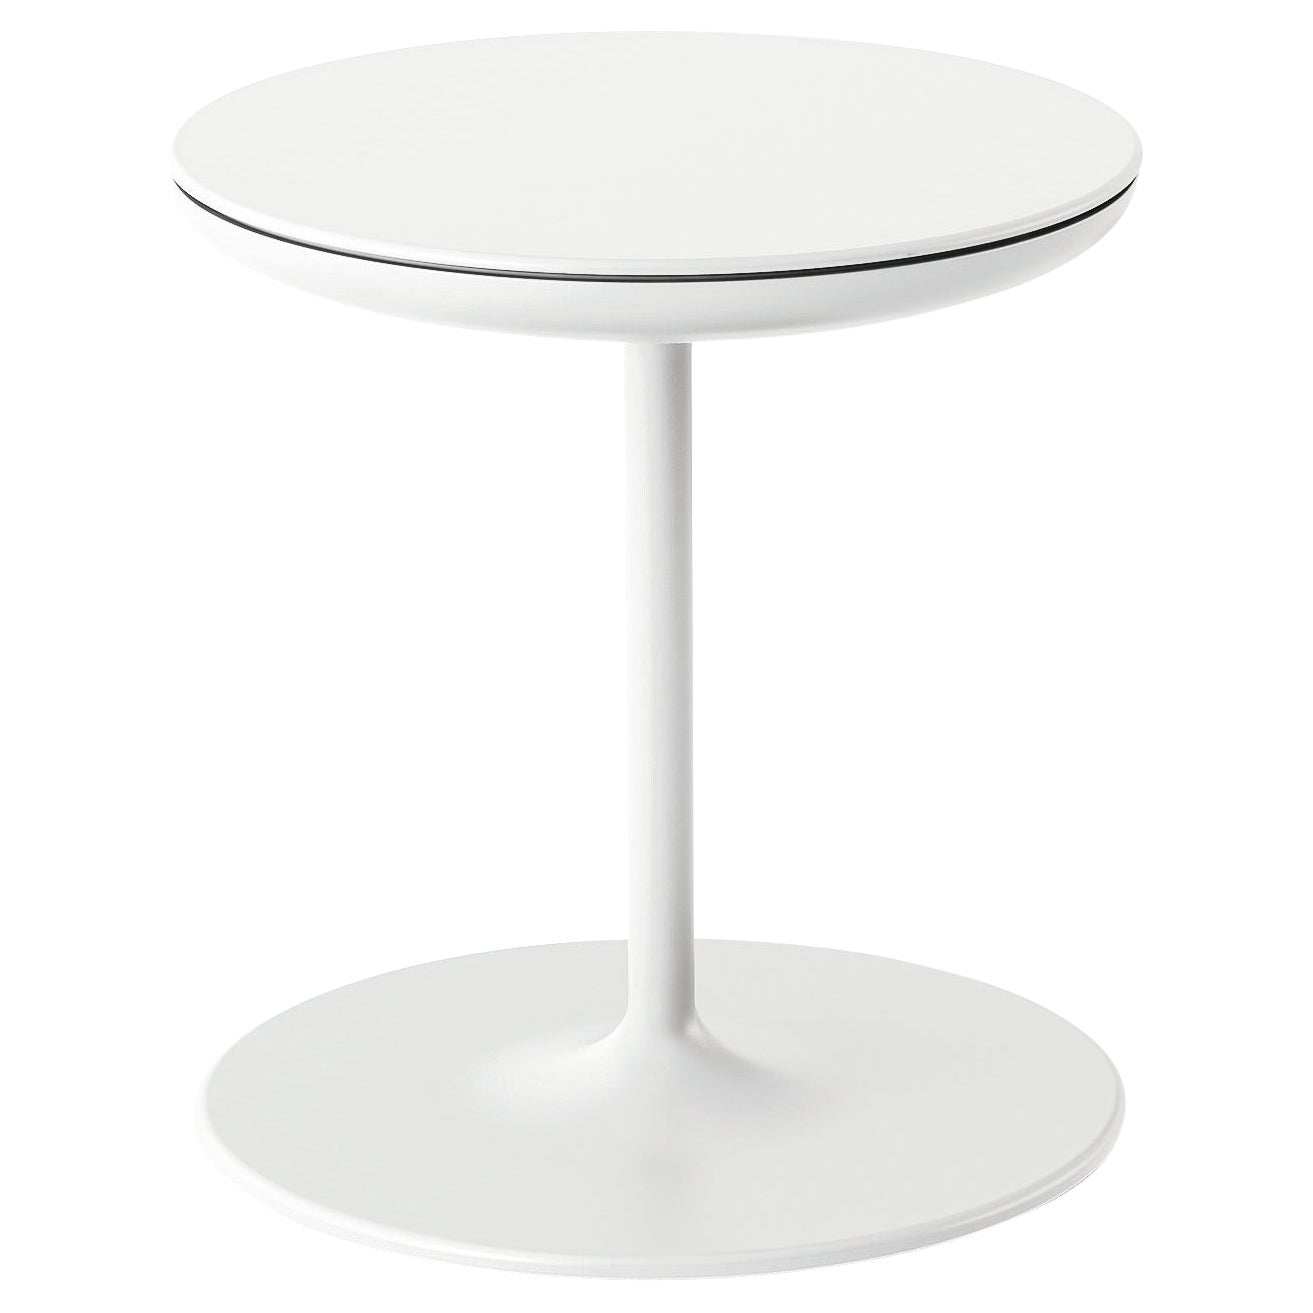 Zanotta Toi Small Table in White Finish with Plywood Top by Salvatore Indriolo